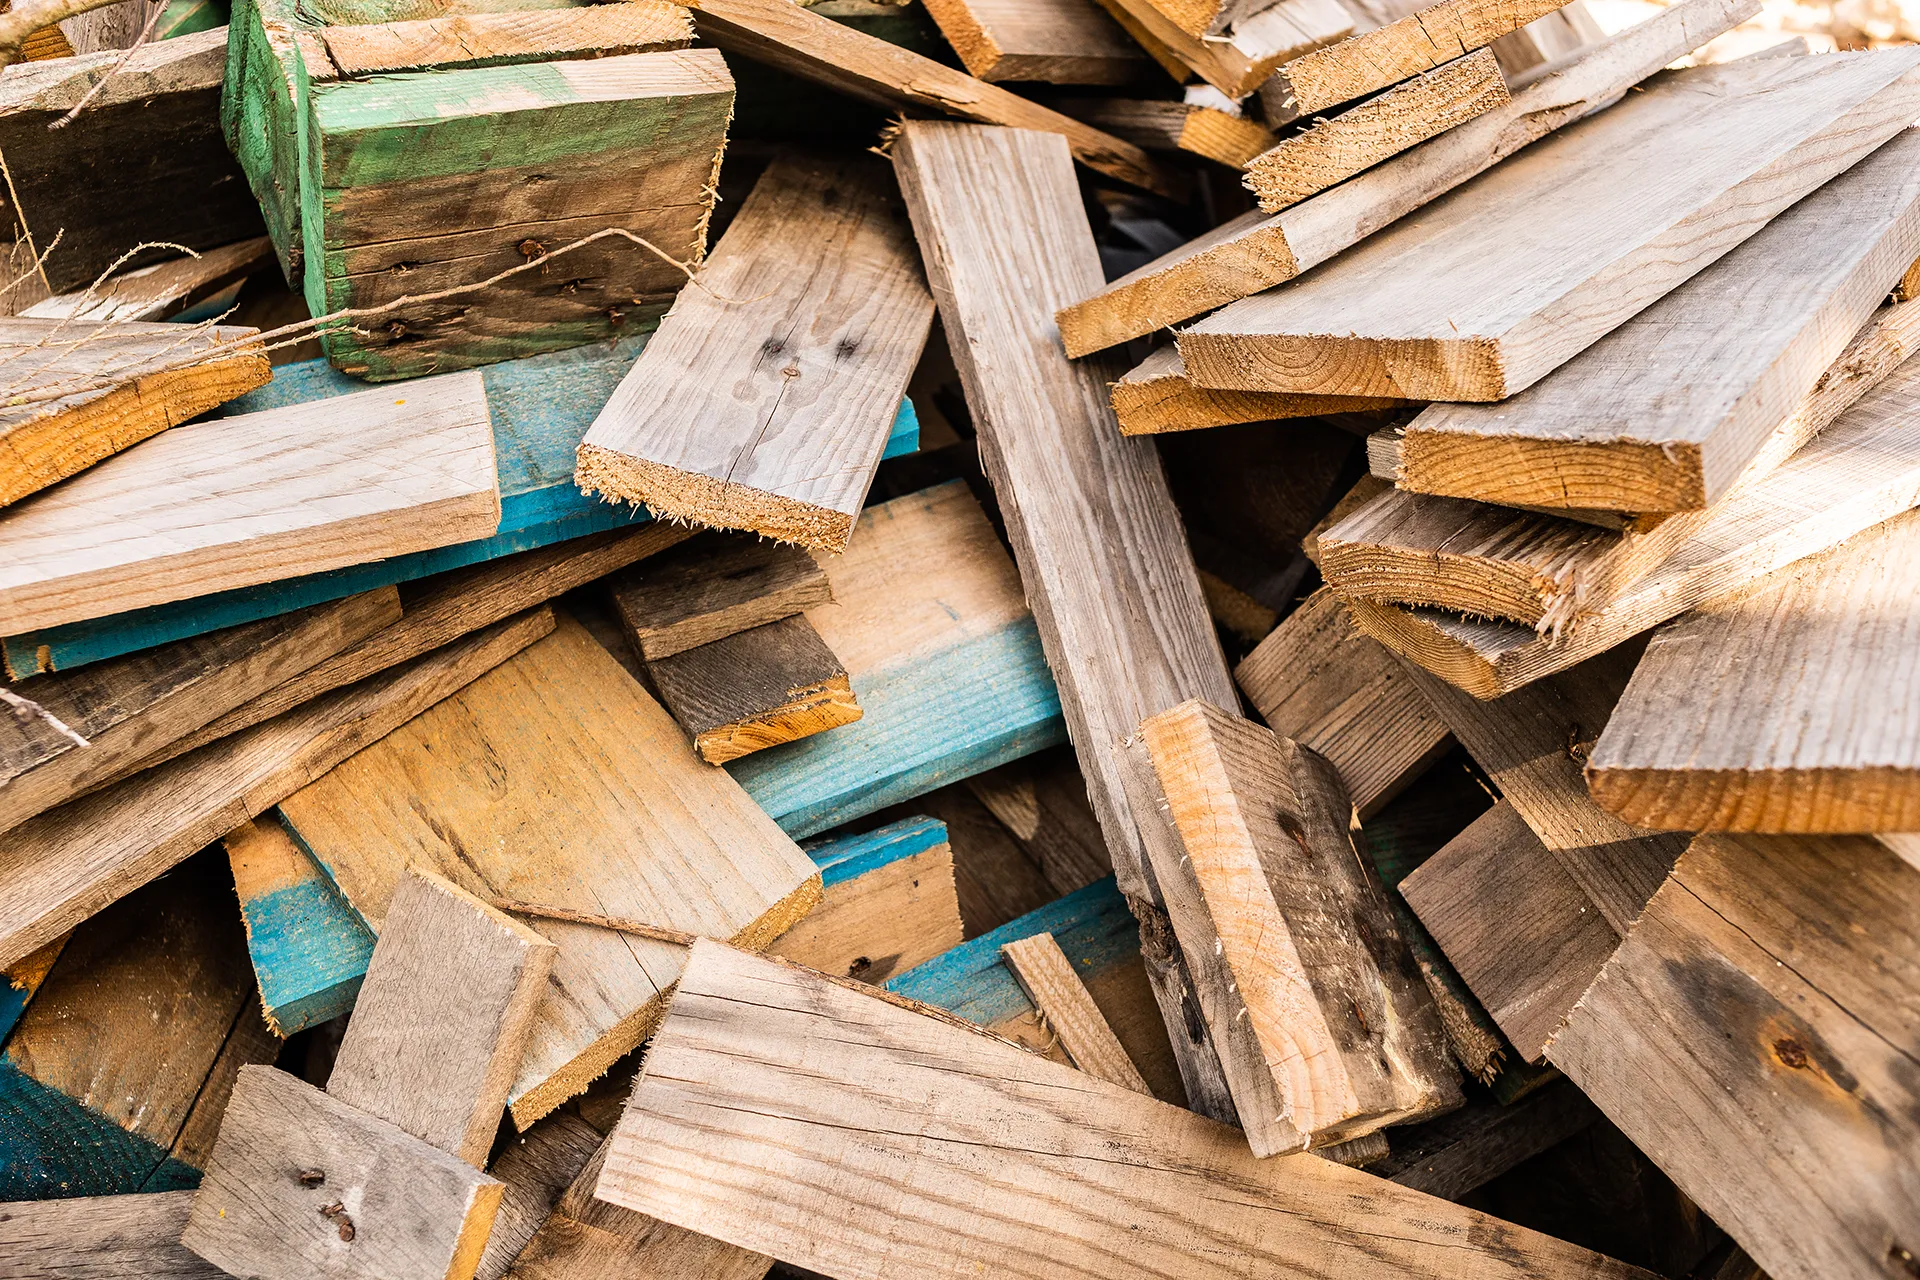 wood waste & recycling collections